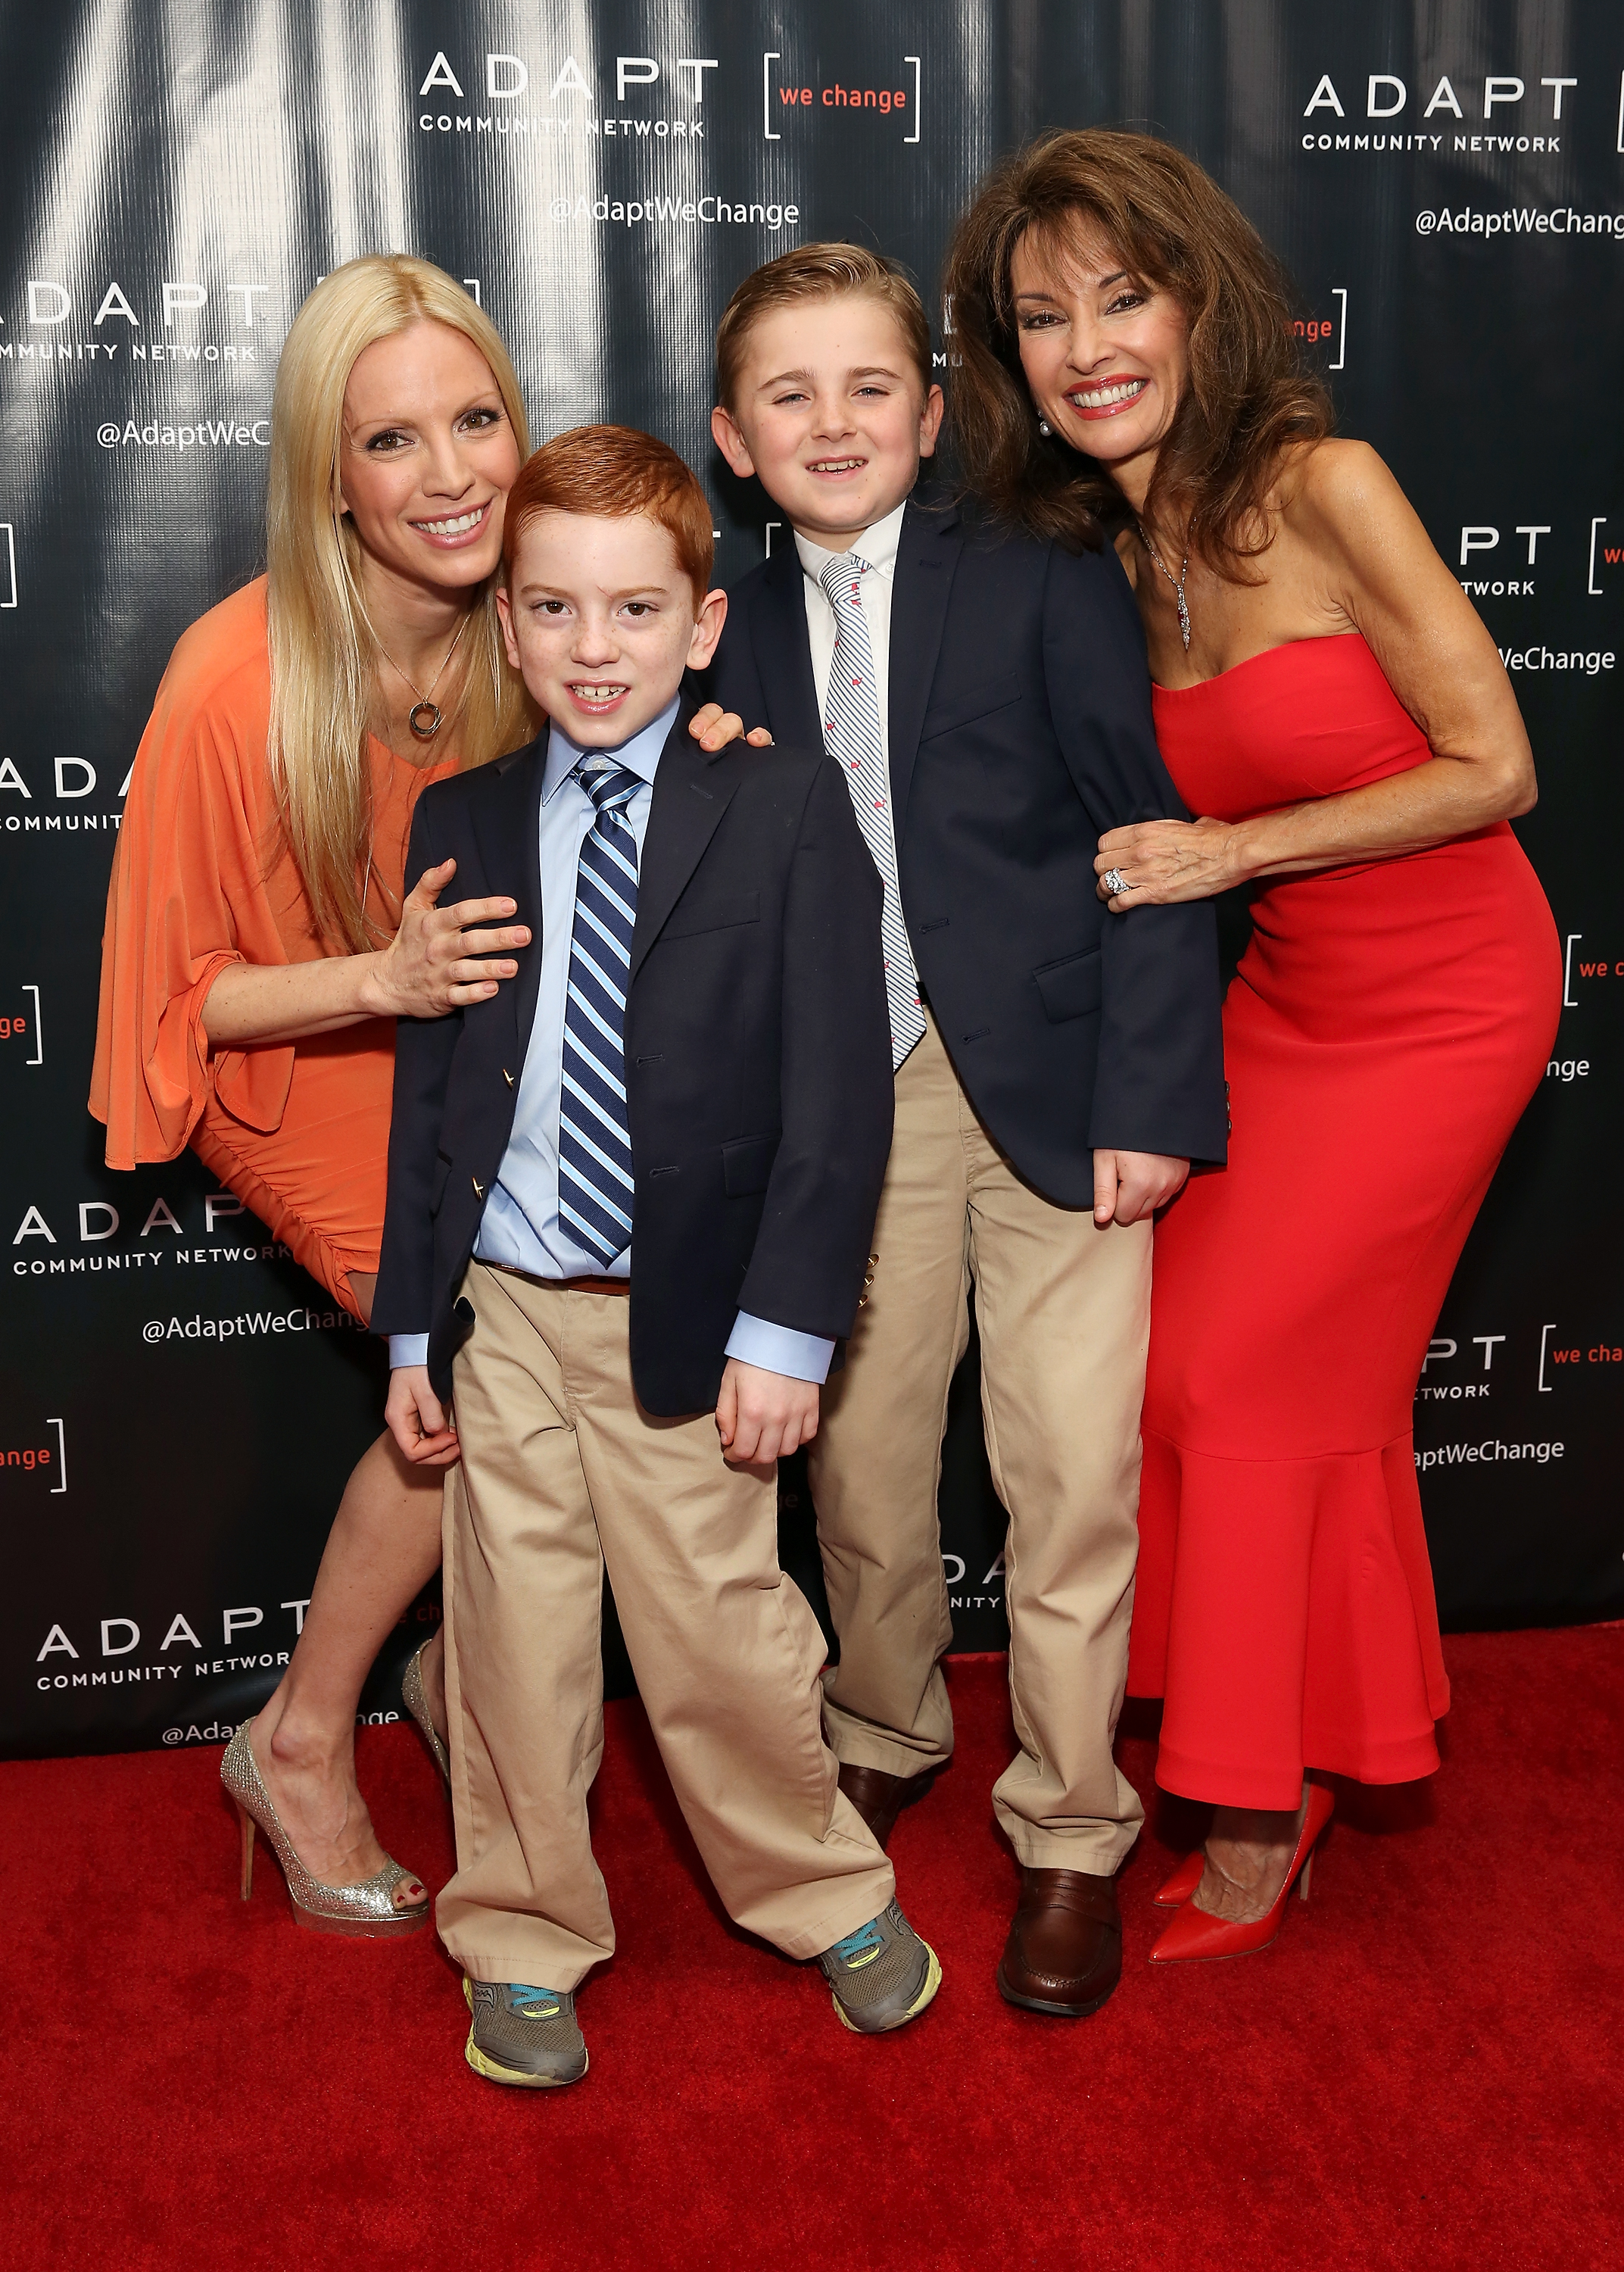 Liza Huber, Brendan Hesterberg, Royce Alexander Hesterberg, and Susan Lucci attend the UCP of NYC 70th Anniversary Celebration Gala in New York City on March 9, 2017. | Source: Getty Images